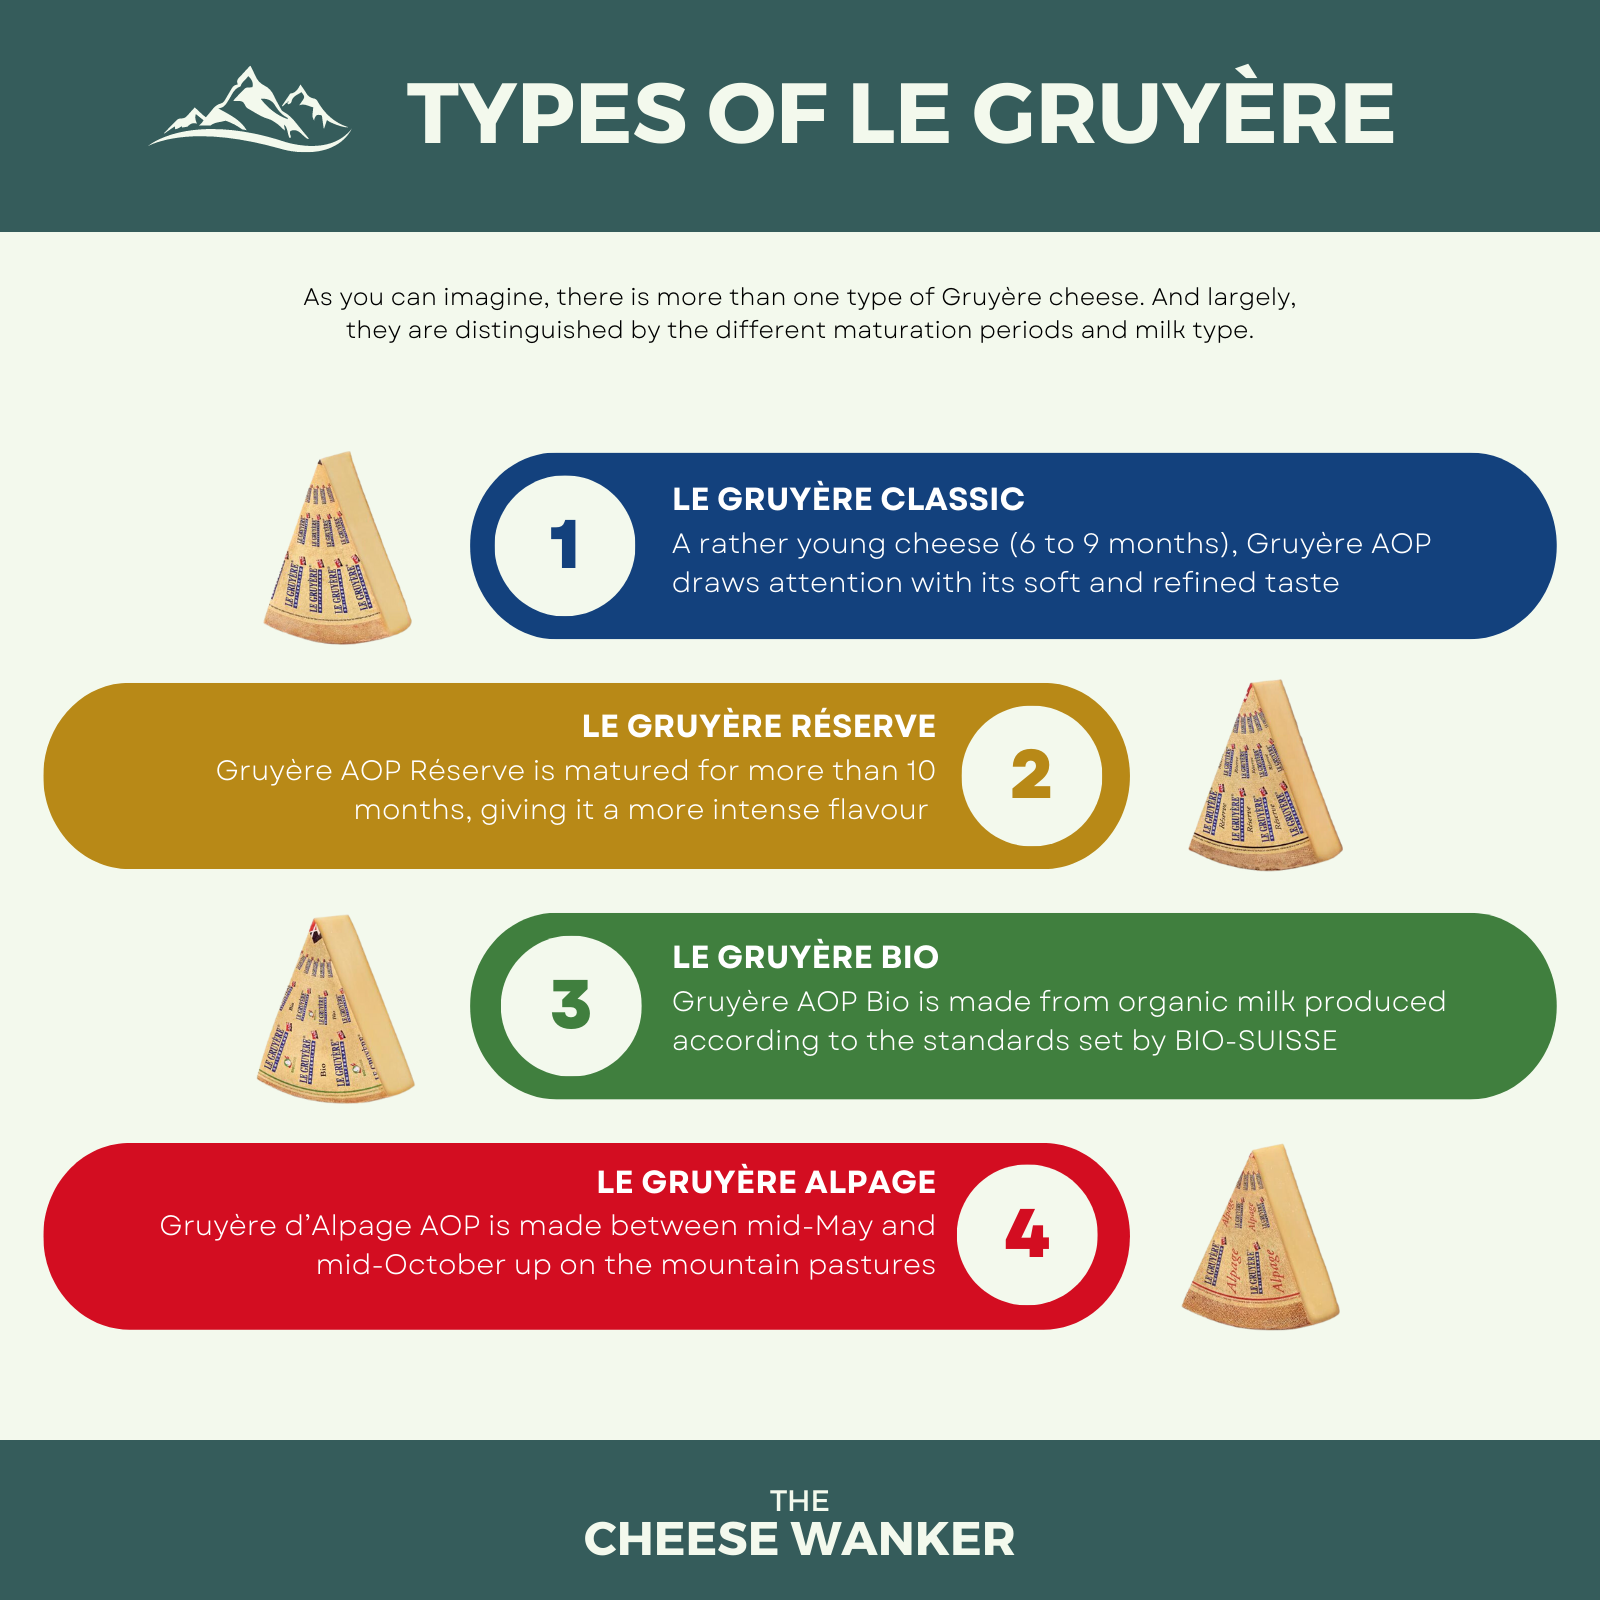 As you can imagine, there is more than one type of Gruyère cheese. And largely, they are distinguished by the different maturation periods.